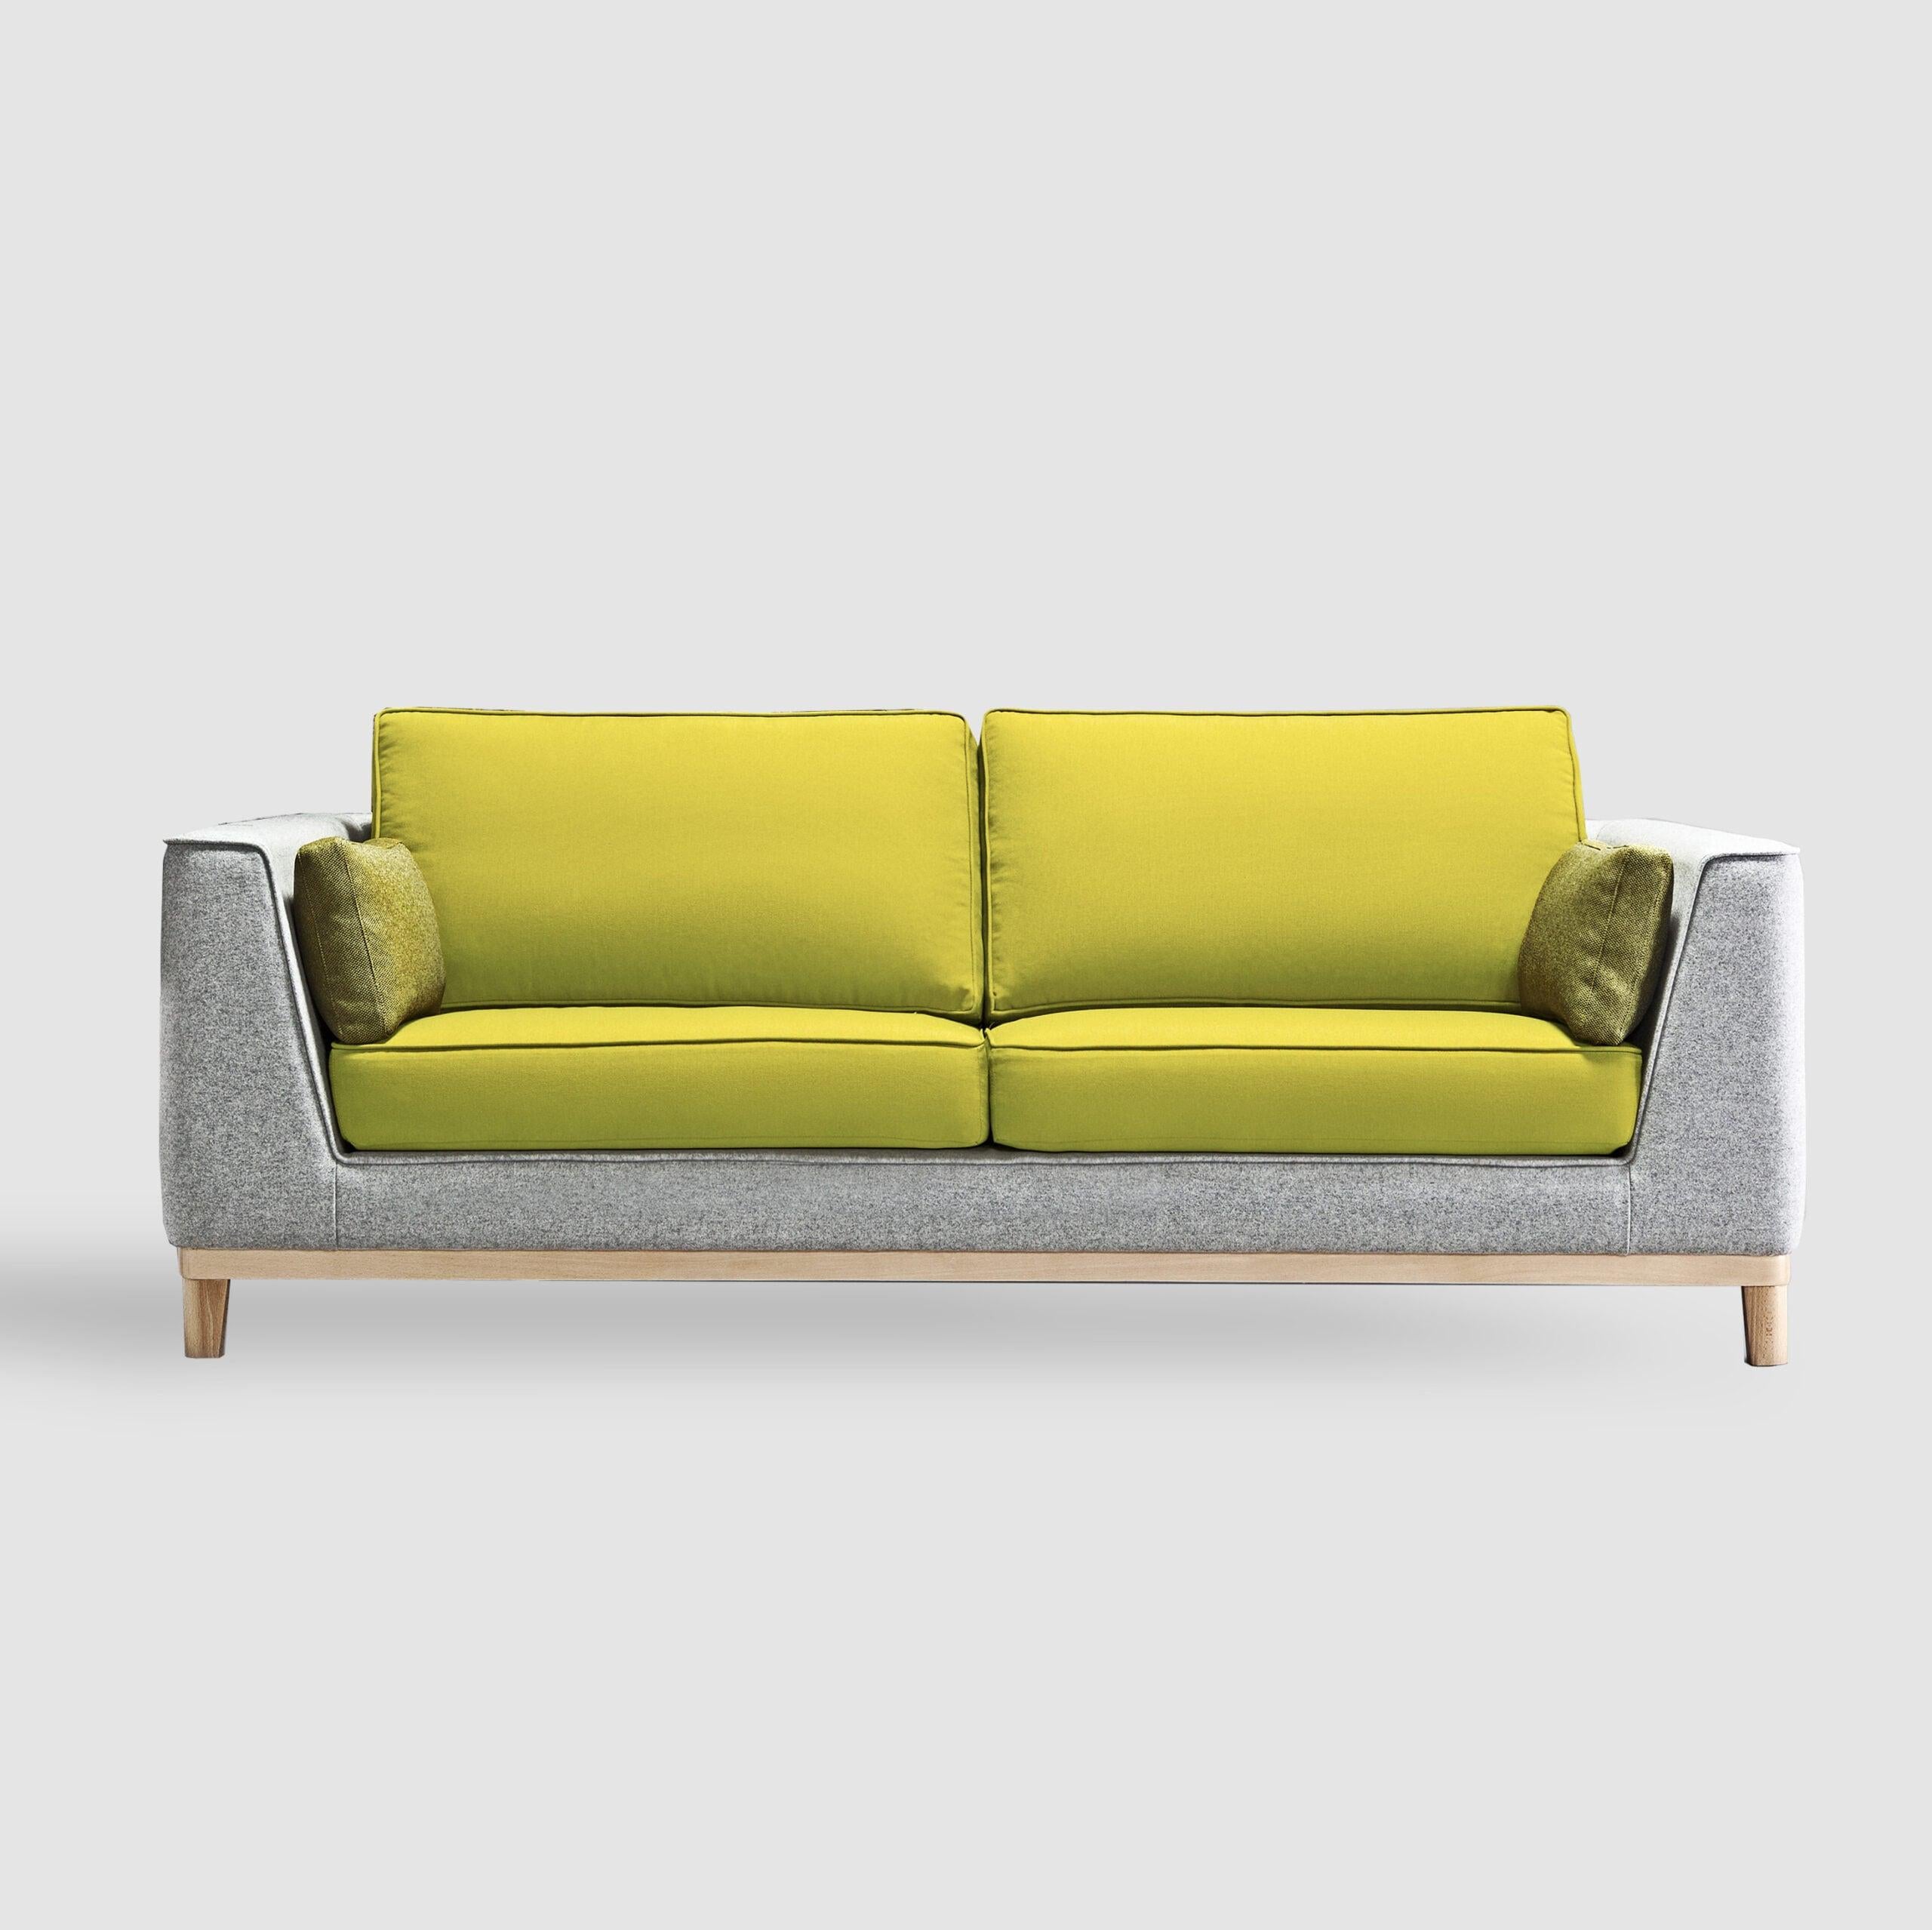 Gobi sofa by Pepe Albargues
Dimensions: W 200 x D 102 x H 85 cm
Materials: Pine wood structure reinforced with plywood and tablex.
Seat CMHR (high resilence and flame retardant) for all our cushion filling systems.
Back stuffed with 50% goose